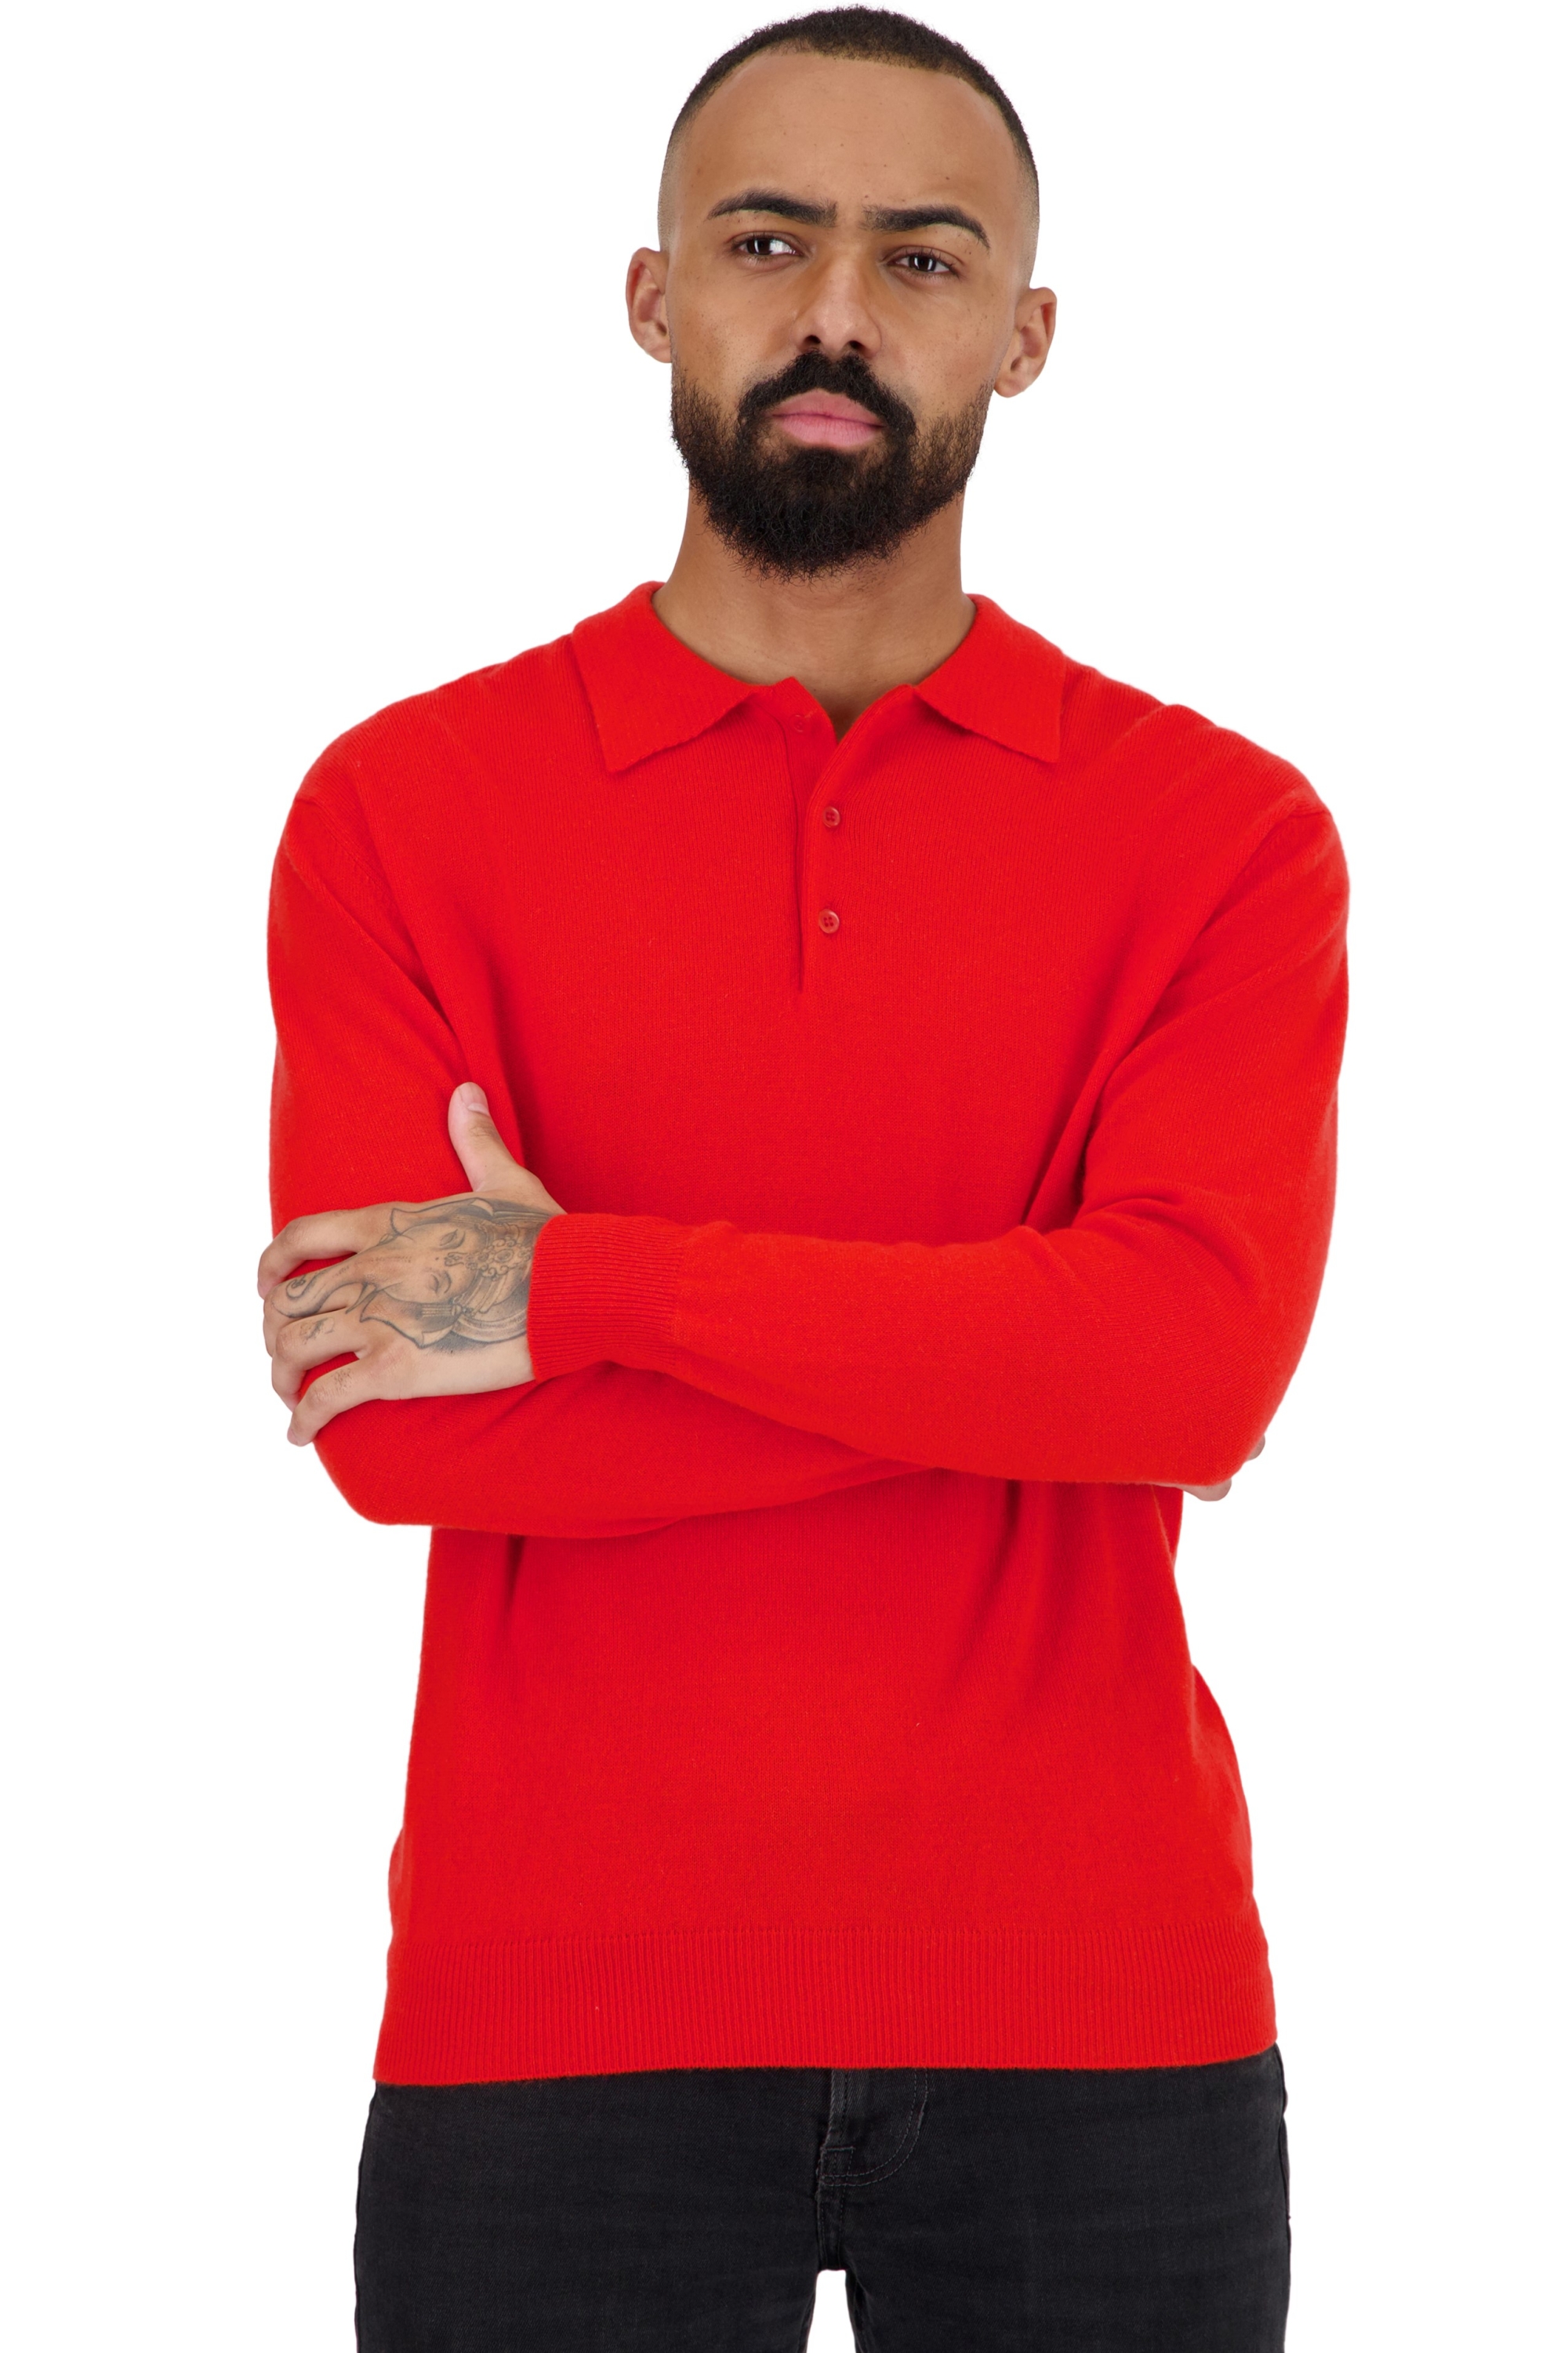 Cashmere men basic sweaters at low prices tarn first tomato 3xl